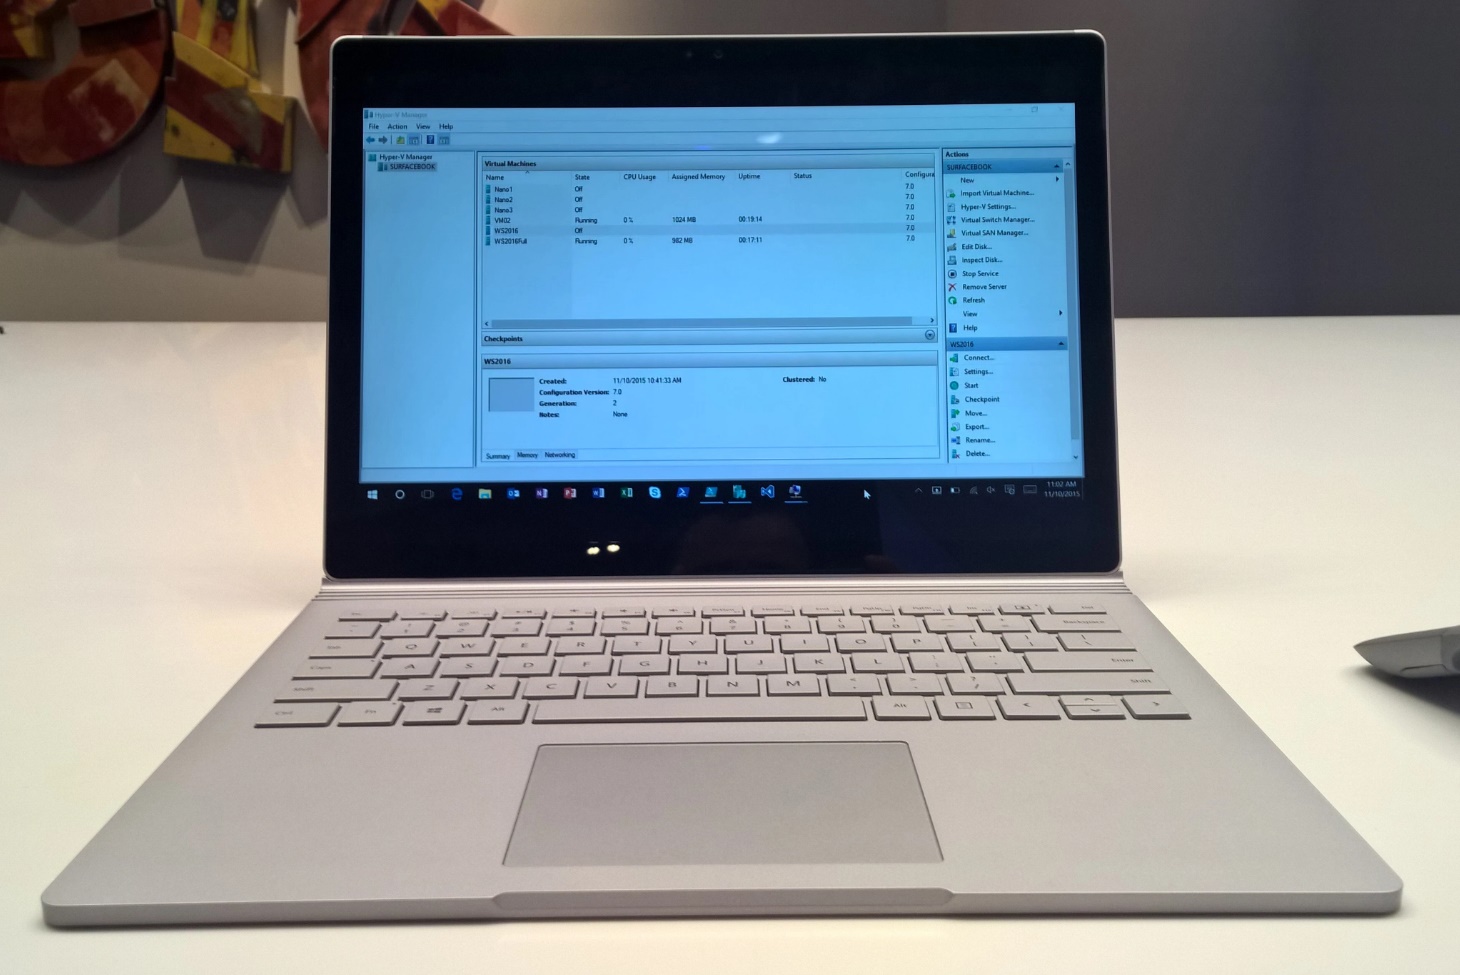 Pain and gain of running virtual machines on a Microsoft Surface Book